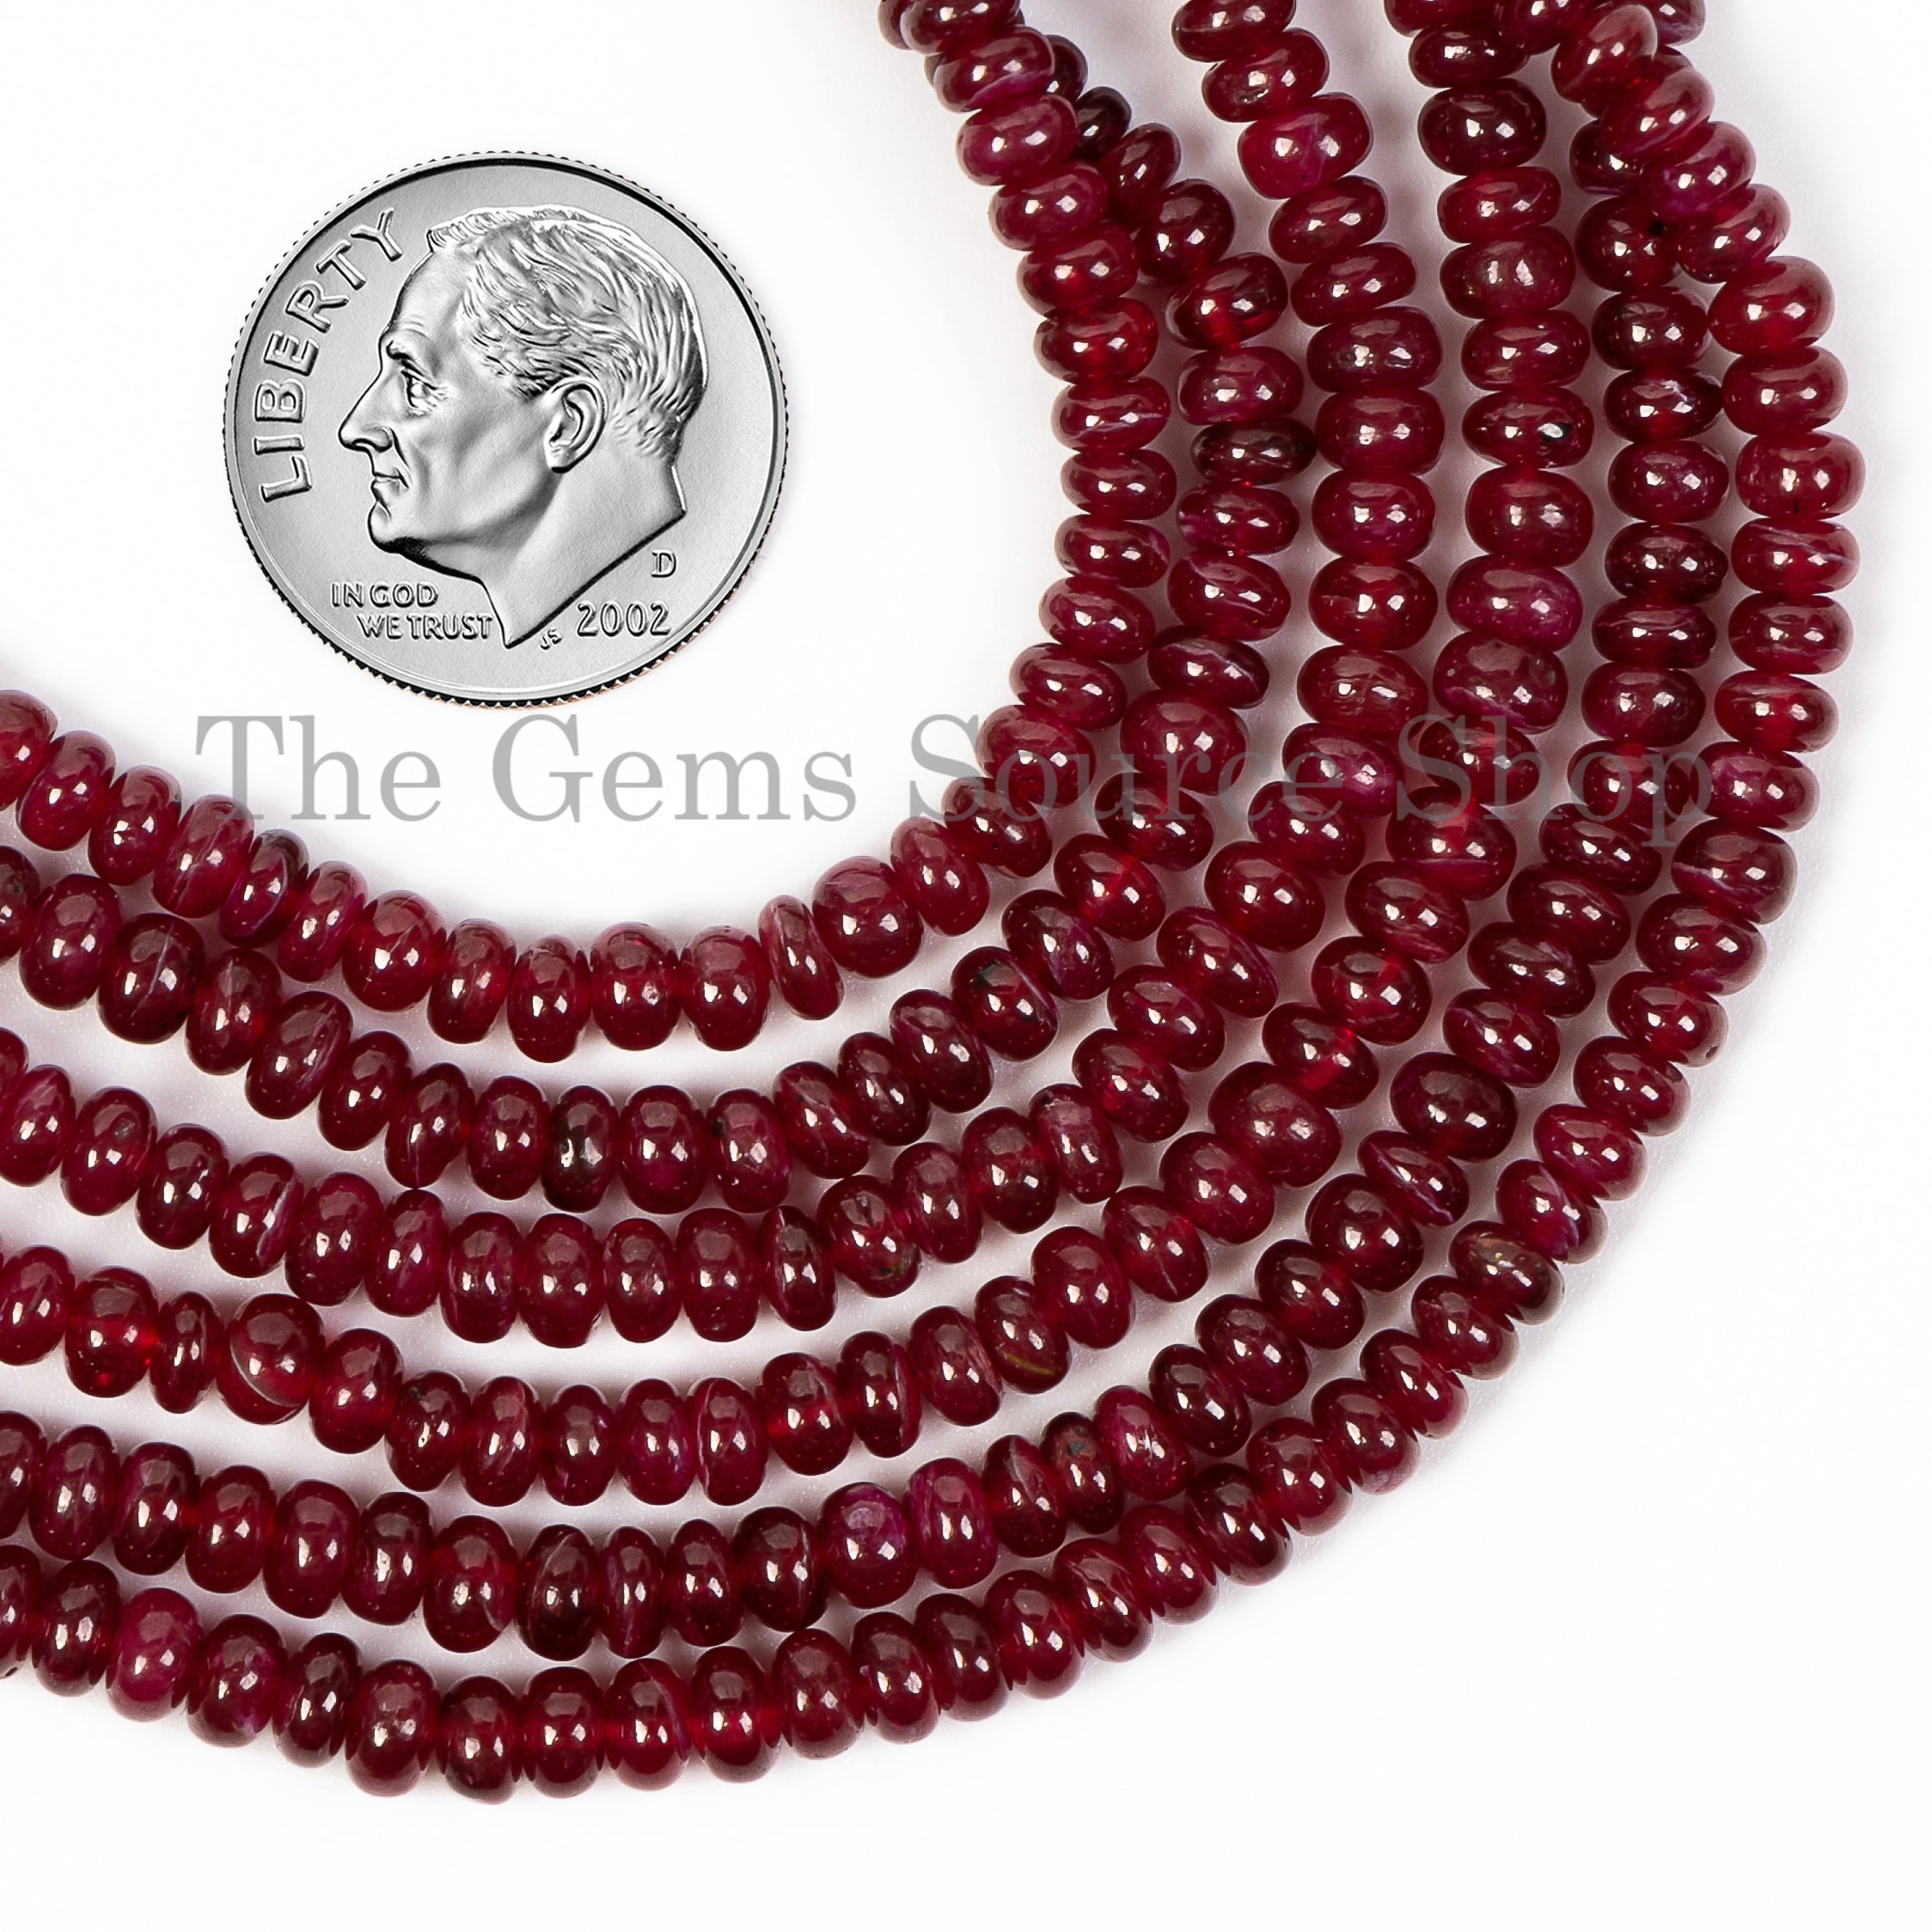 3.50-5 mm Natural Ruby Beads, Ruby Smooth Rondelle Beads, Loose Ruby Plain Beads, TGS-5056